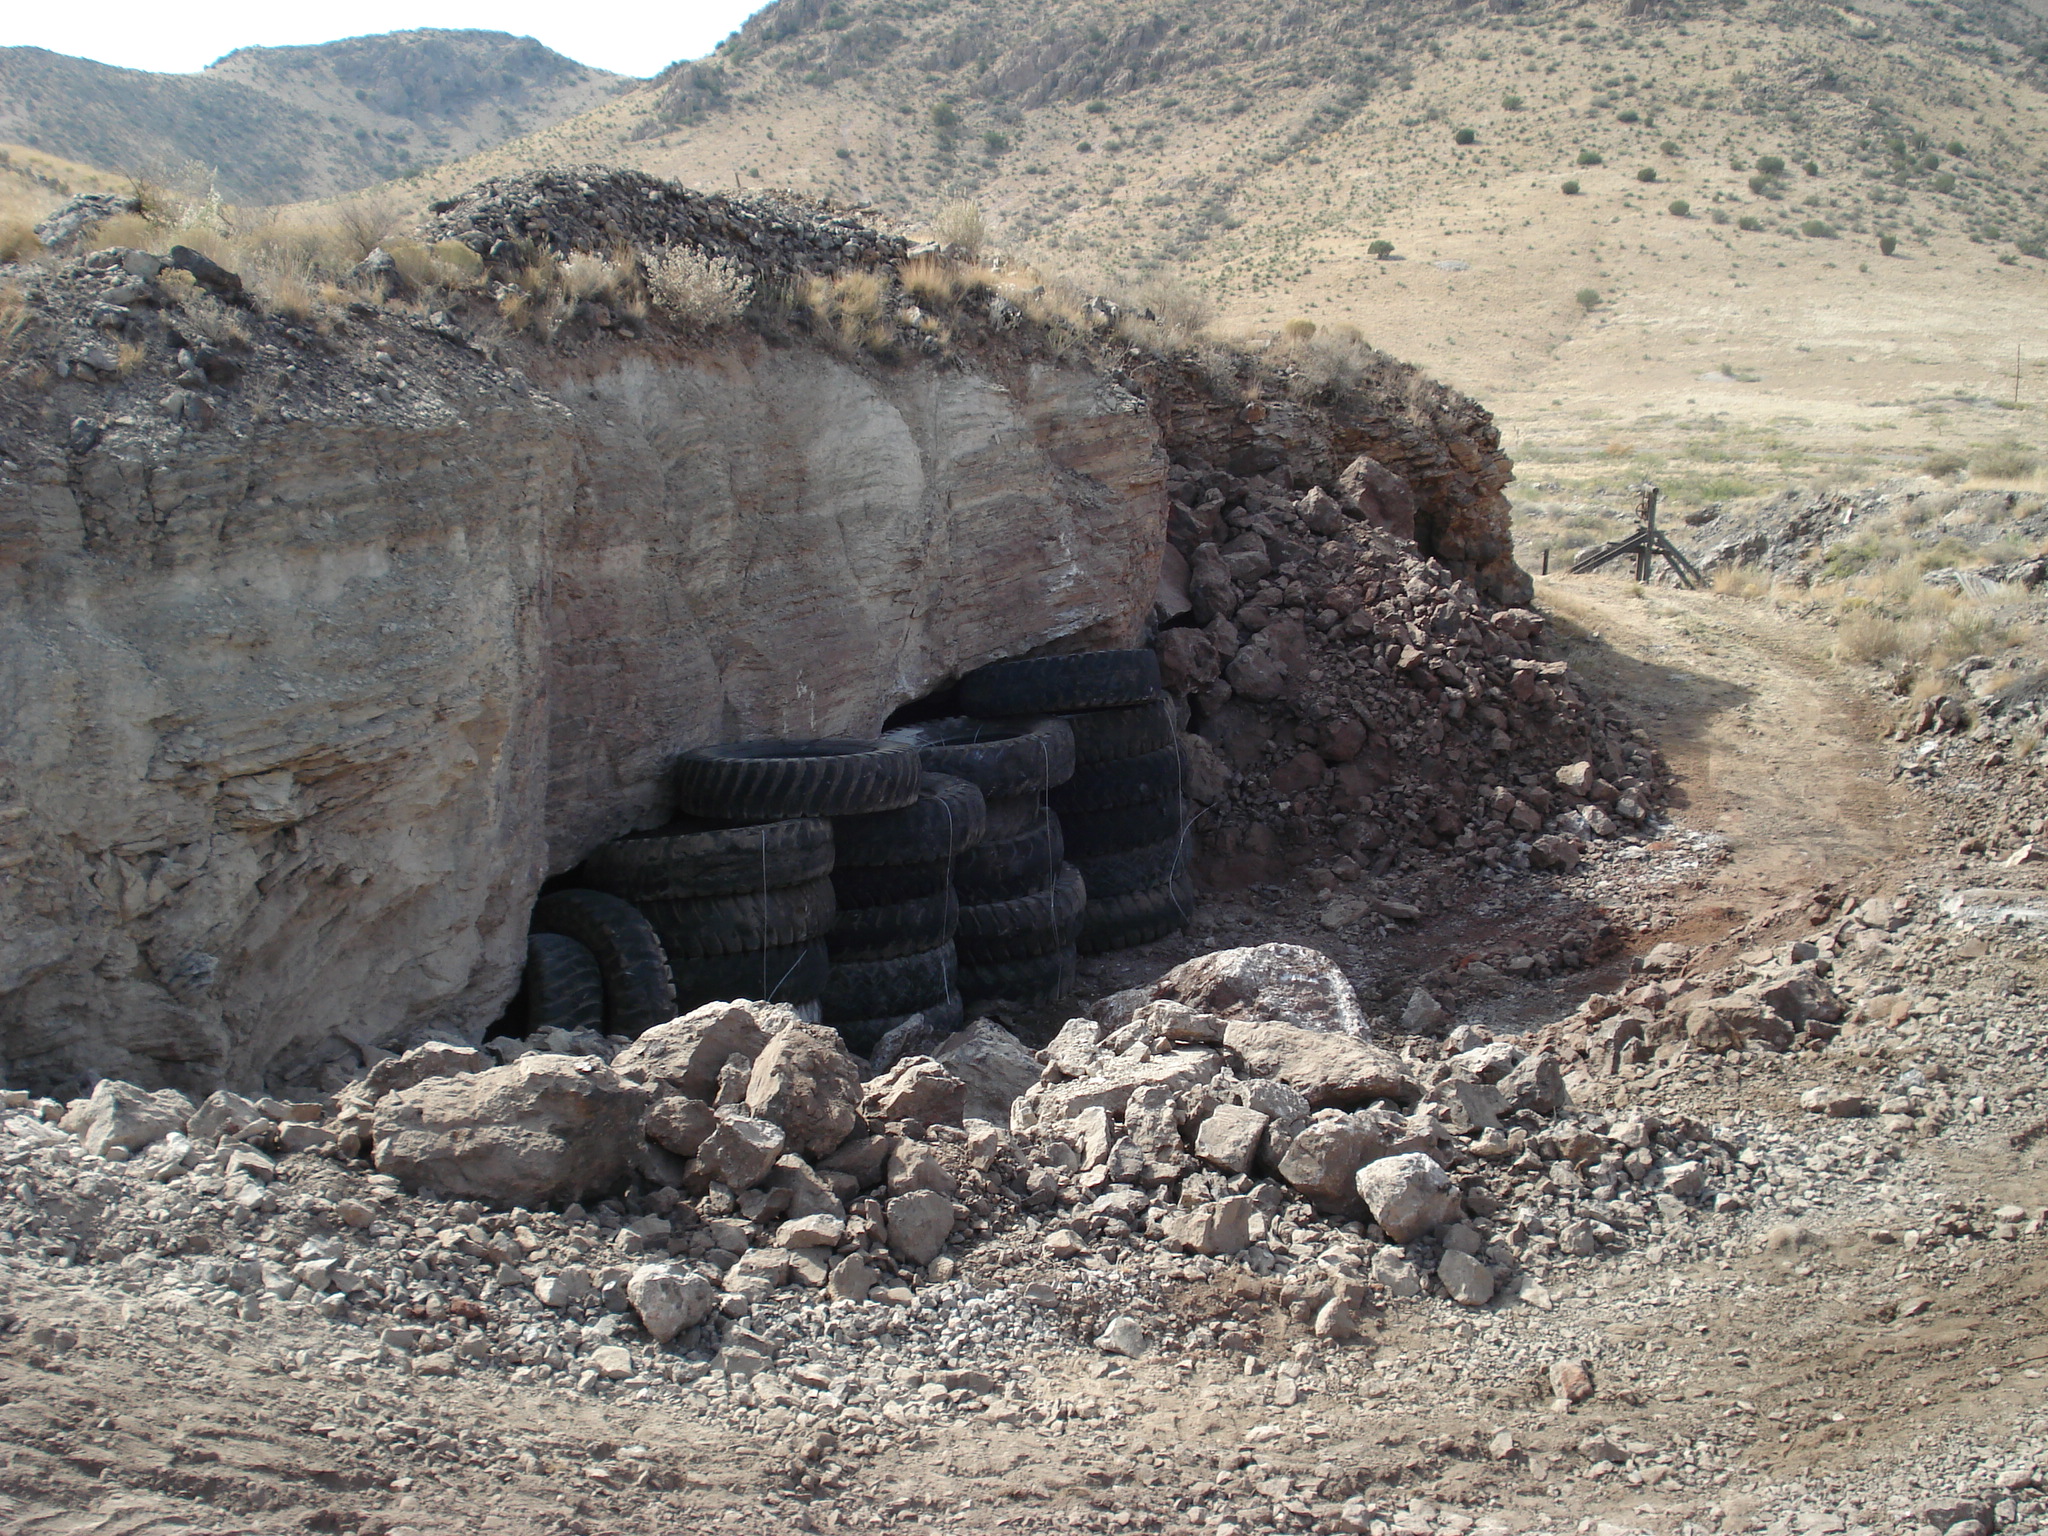 Earth-moving equipment tires used for toroidal tire plugging on a U.S. mine site.